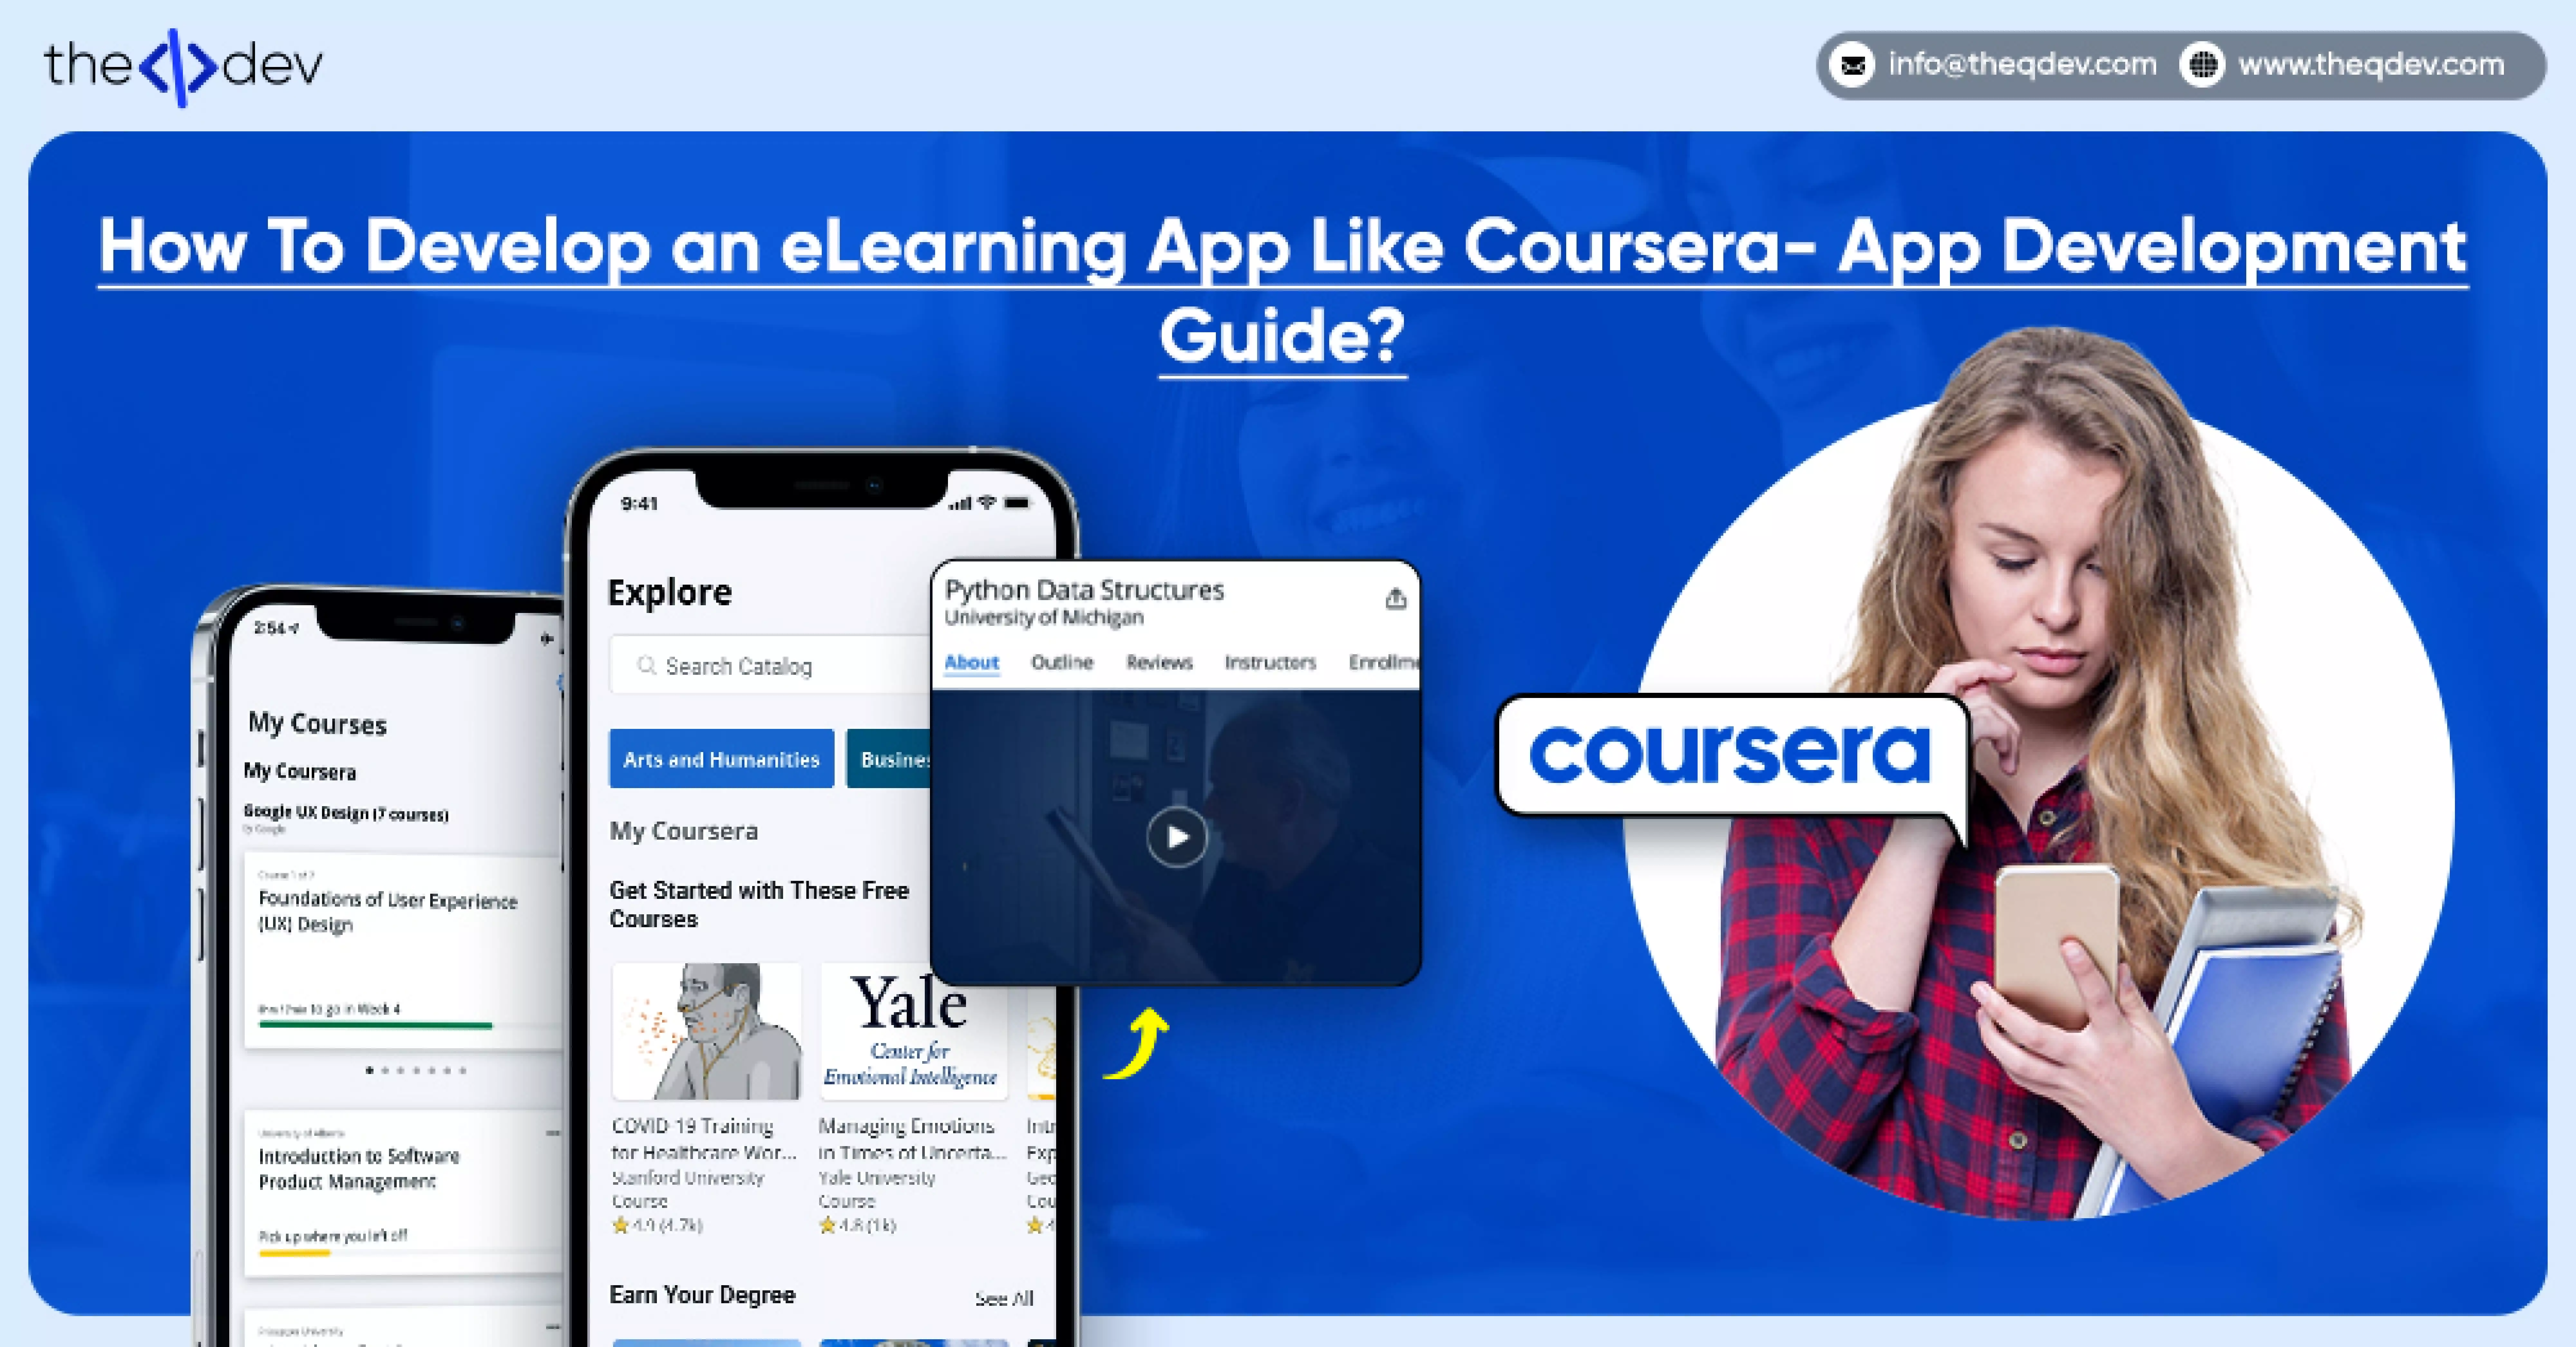 How To Develop an eLearning App Like Coursera- Application Development Guide